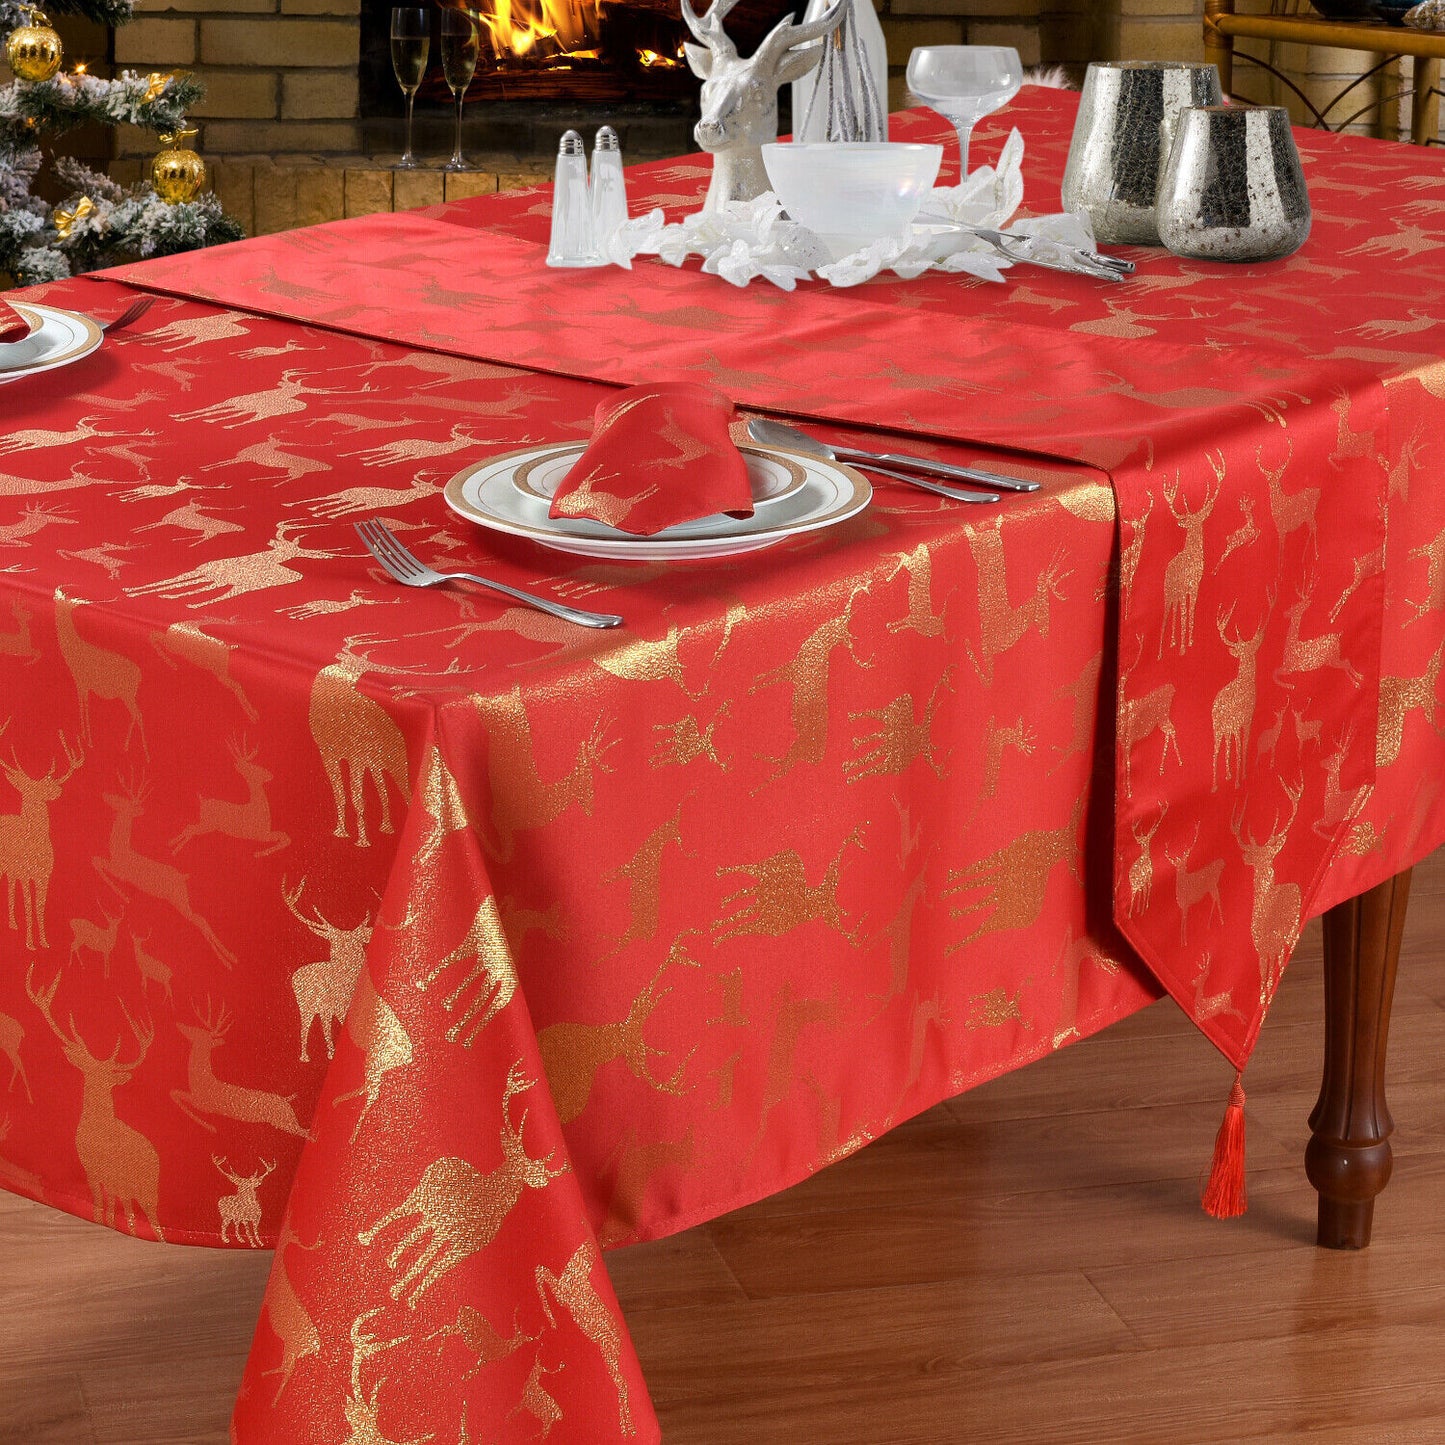 Large Stag Deer Red Gold 54" x 72" Oblong Tablecloth 4 - 6 Place Setting Festive Dining